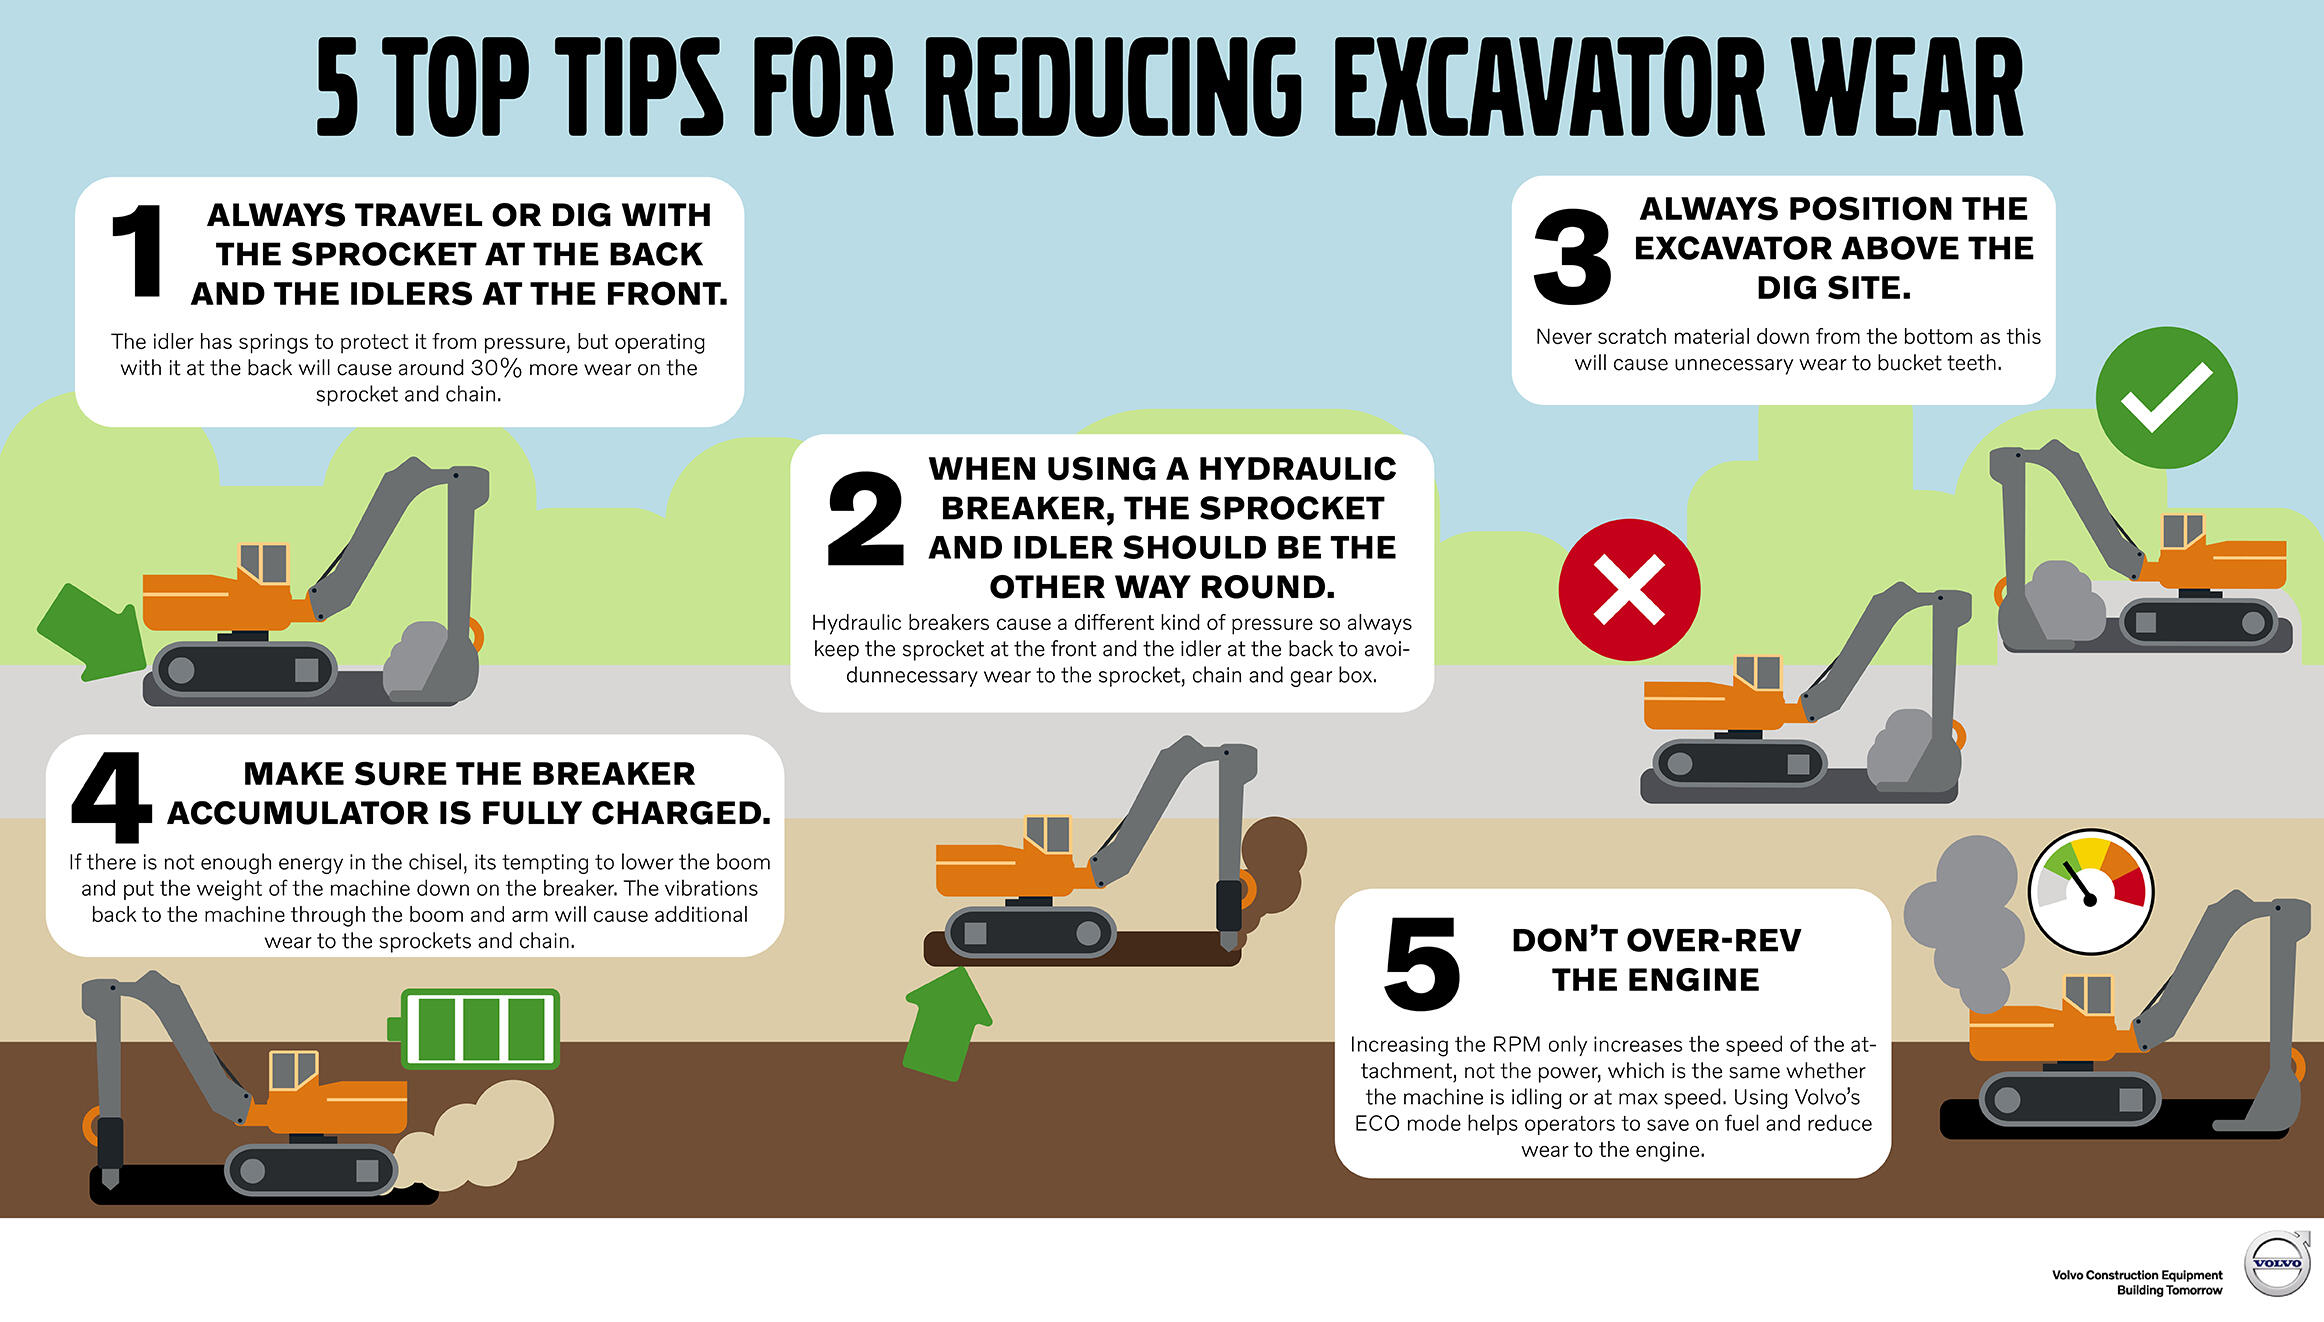 5 tips for reducing excavator wear